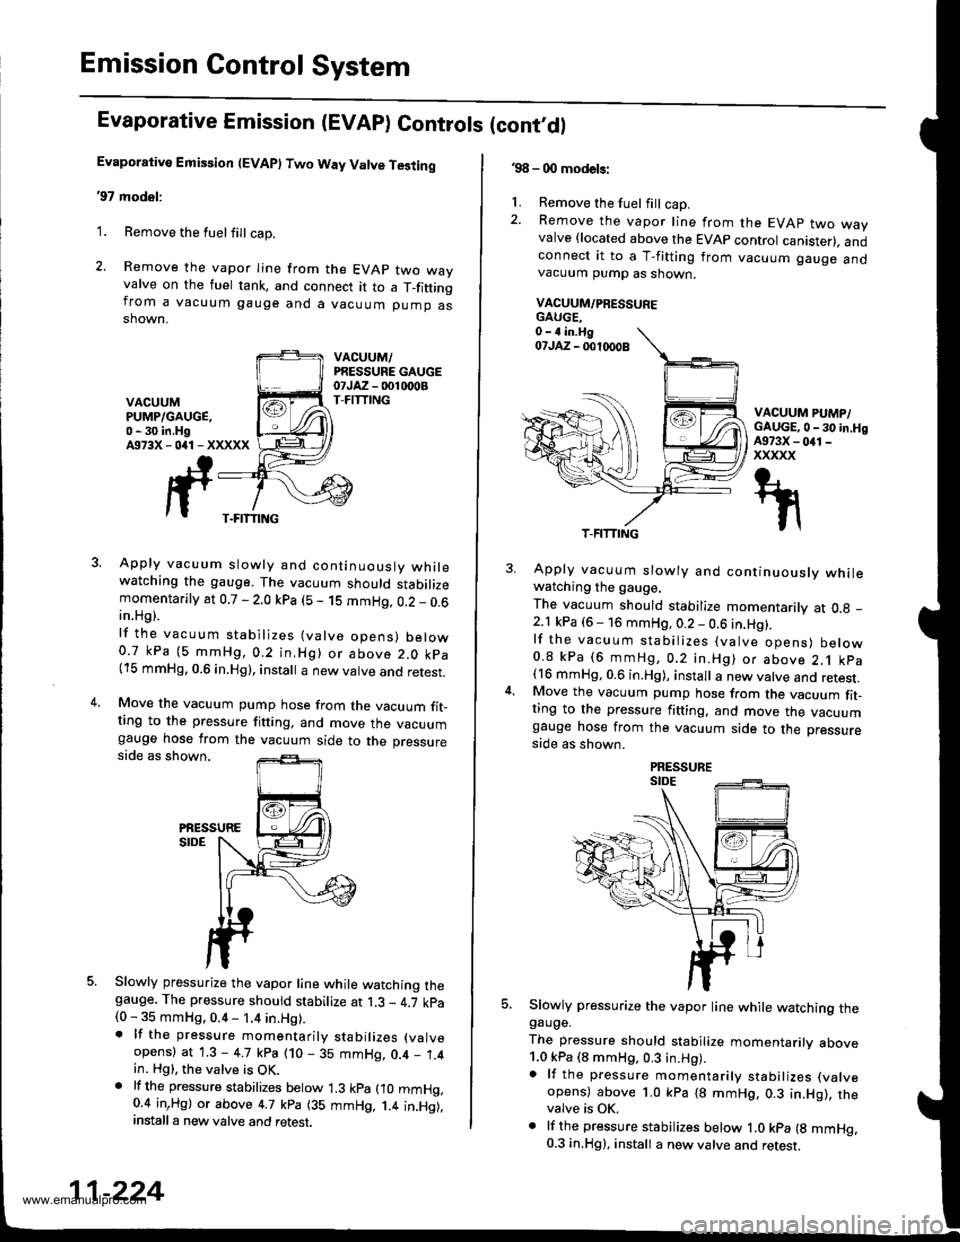 HONDA CR-V 1999 RD1-RD3 / 1.G Owners Manual 
Emission Control System
Evaporative Emission (EVAP) Controls (cont,dl
Evaporative Emission (EVAP) Two Way Valve Testing
97 model:
1. Remove the fuelfill cap.
2. Remove the vapor Iine from the EVAP t